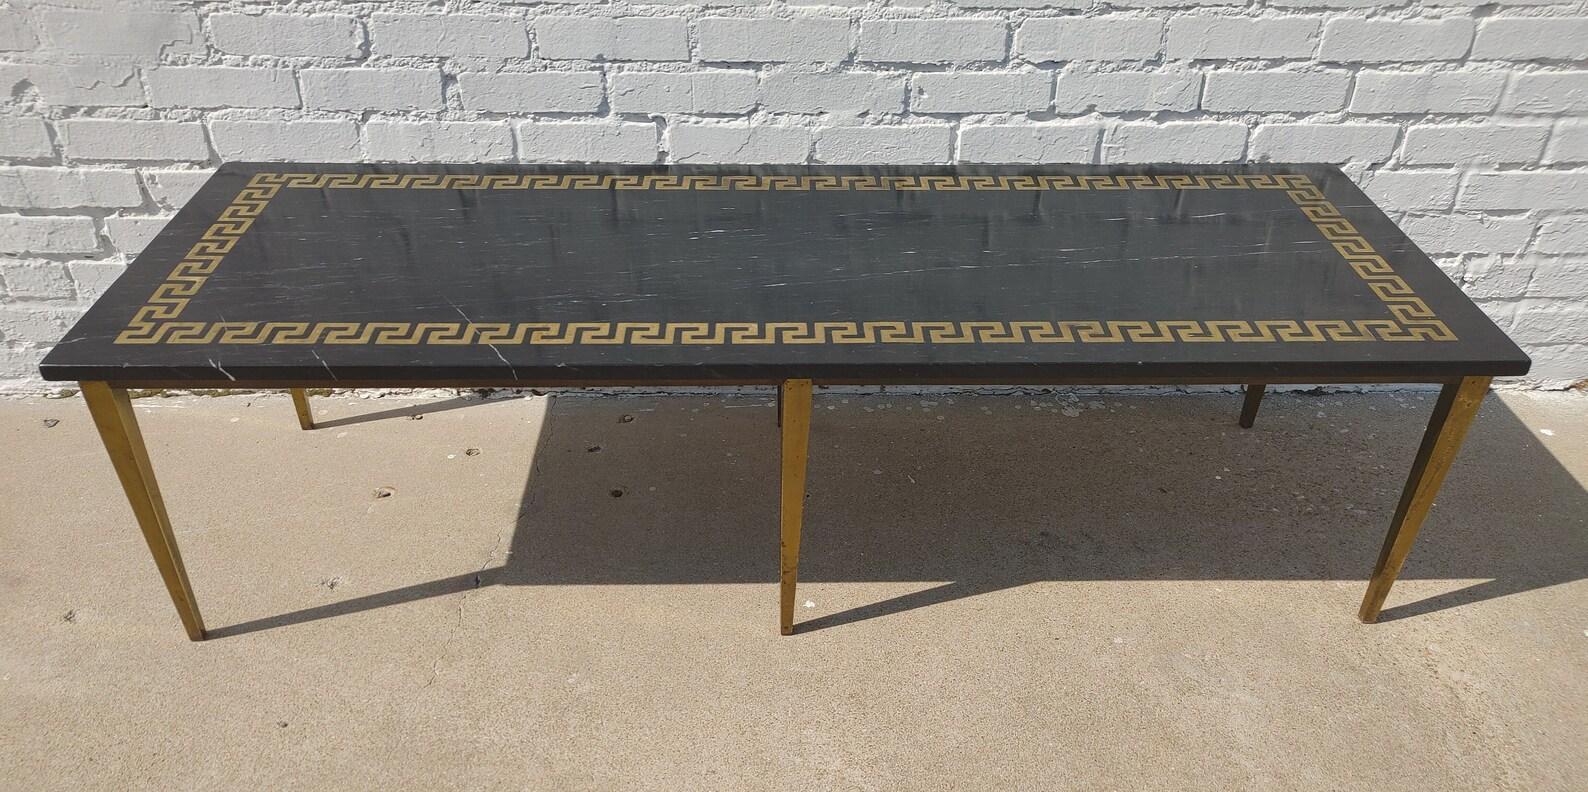 Mid Century Modern Greek Key Marble and Brass Table

Above average vintage condition and structurally sound. Has some expected slight finish wear and scratching. Top has some slight  finish wear and some slight fading in areas. 

Additional